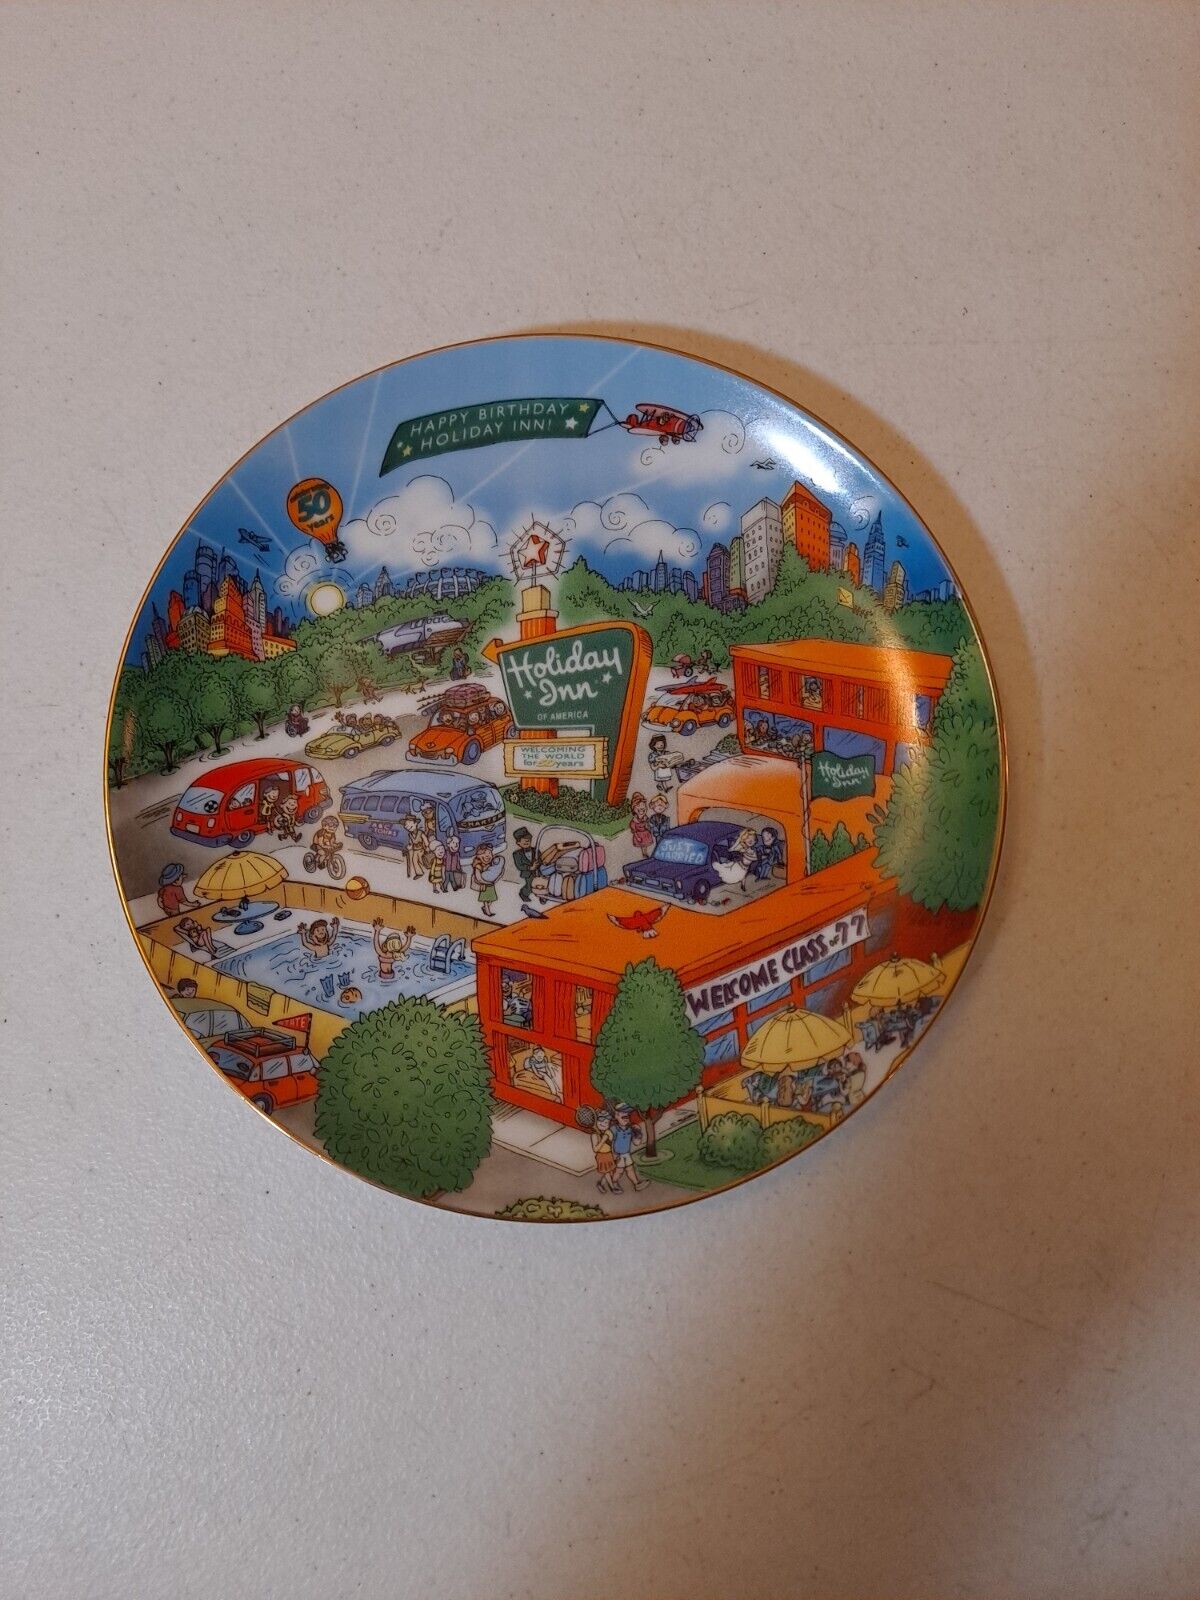 Vintage Holiday Inn Limited Edition Commemorative Plate 2002 Advertising